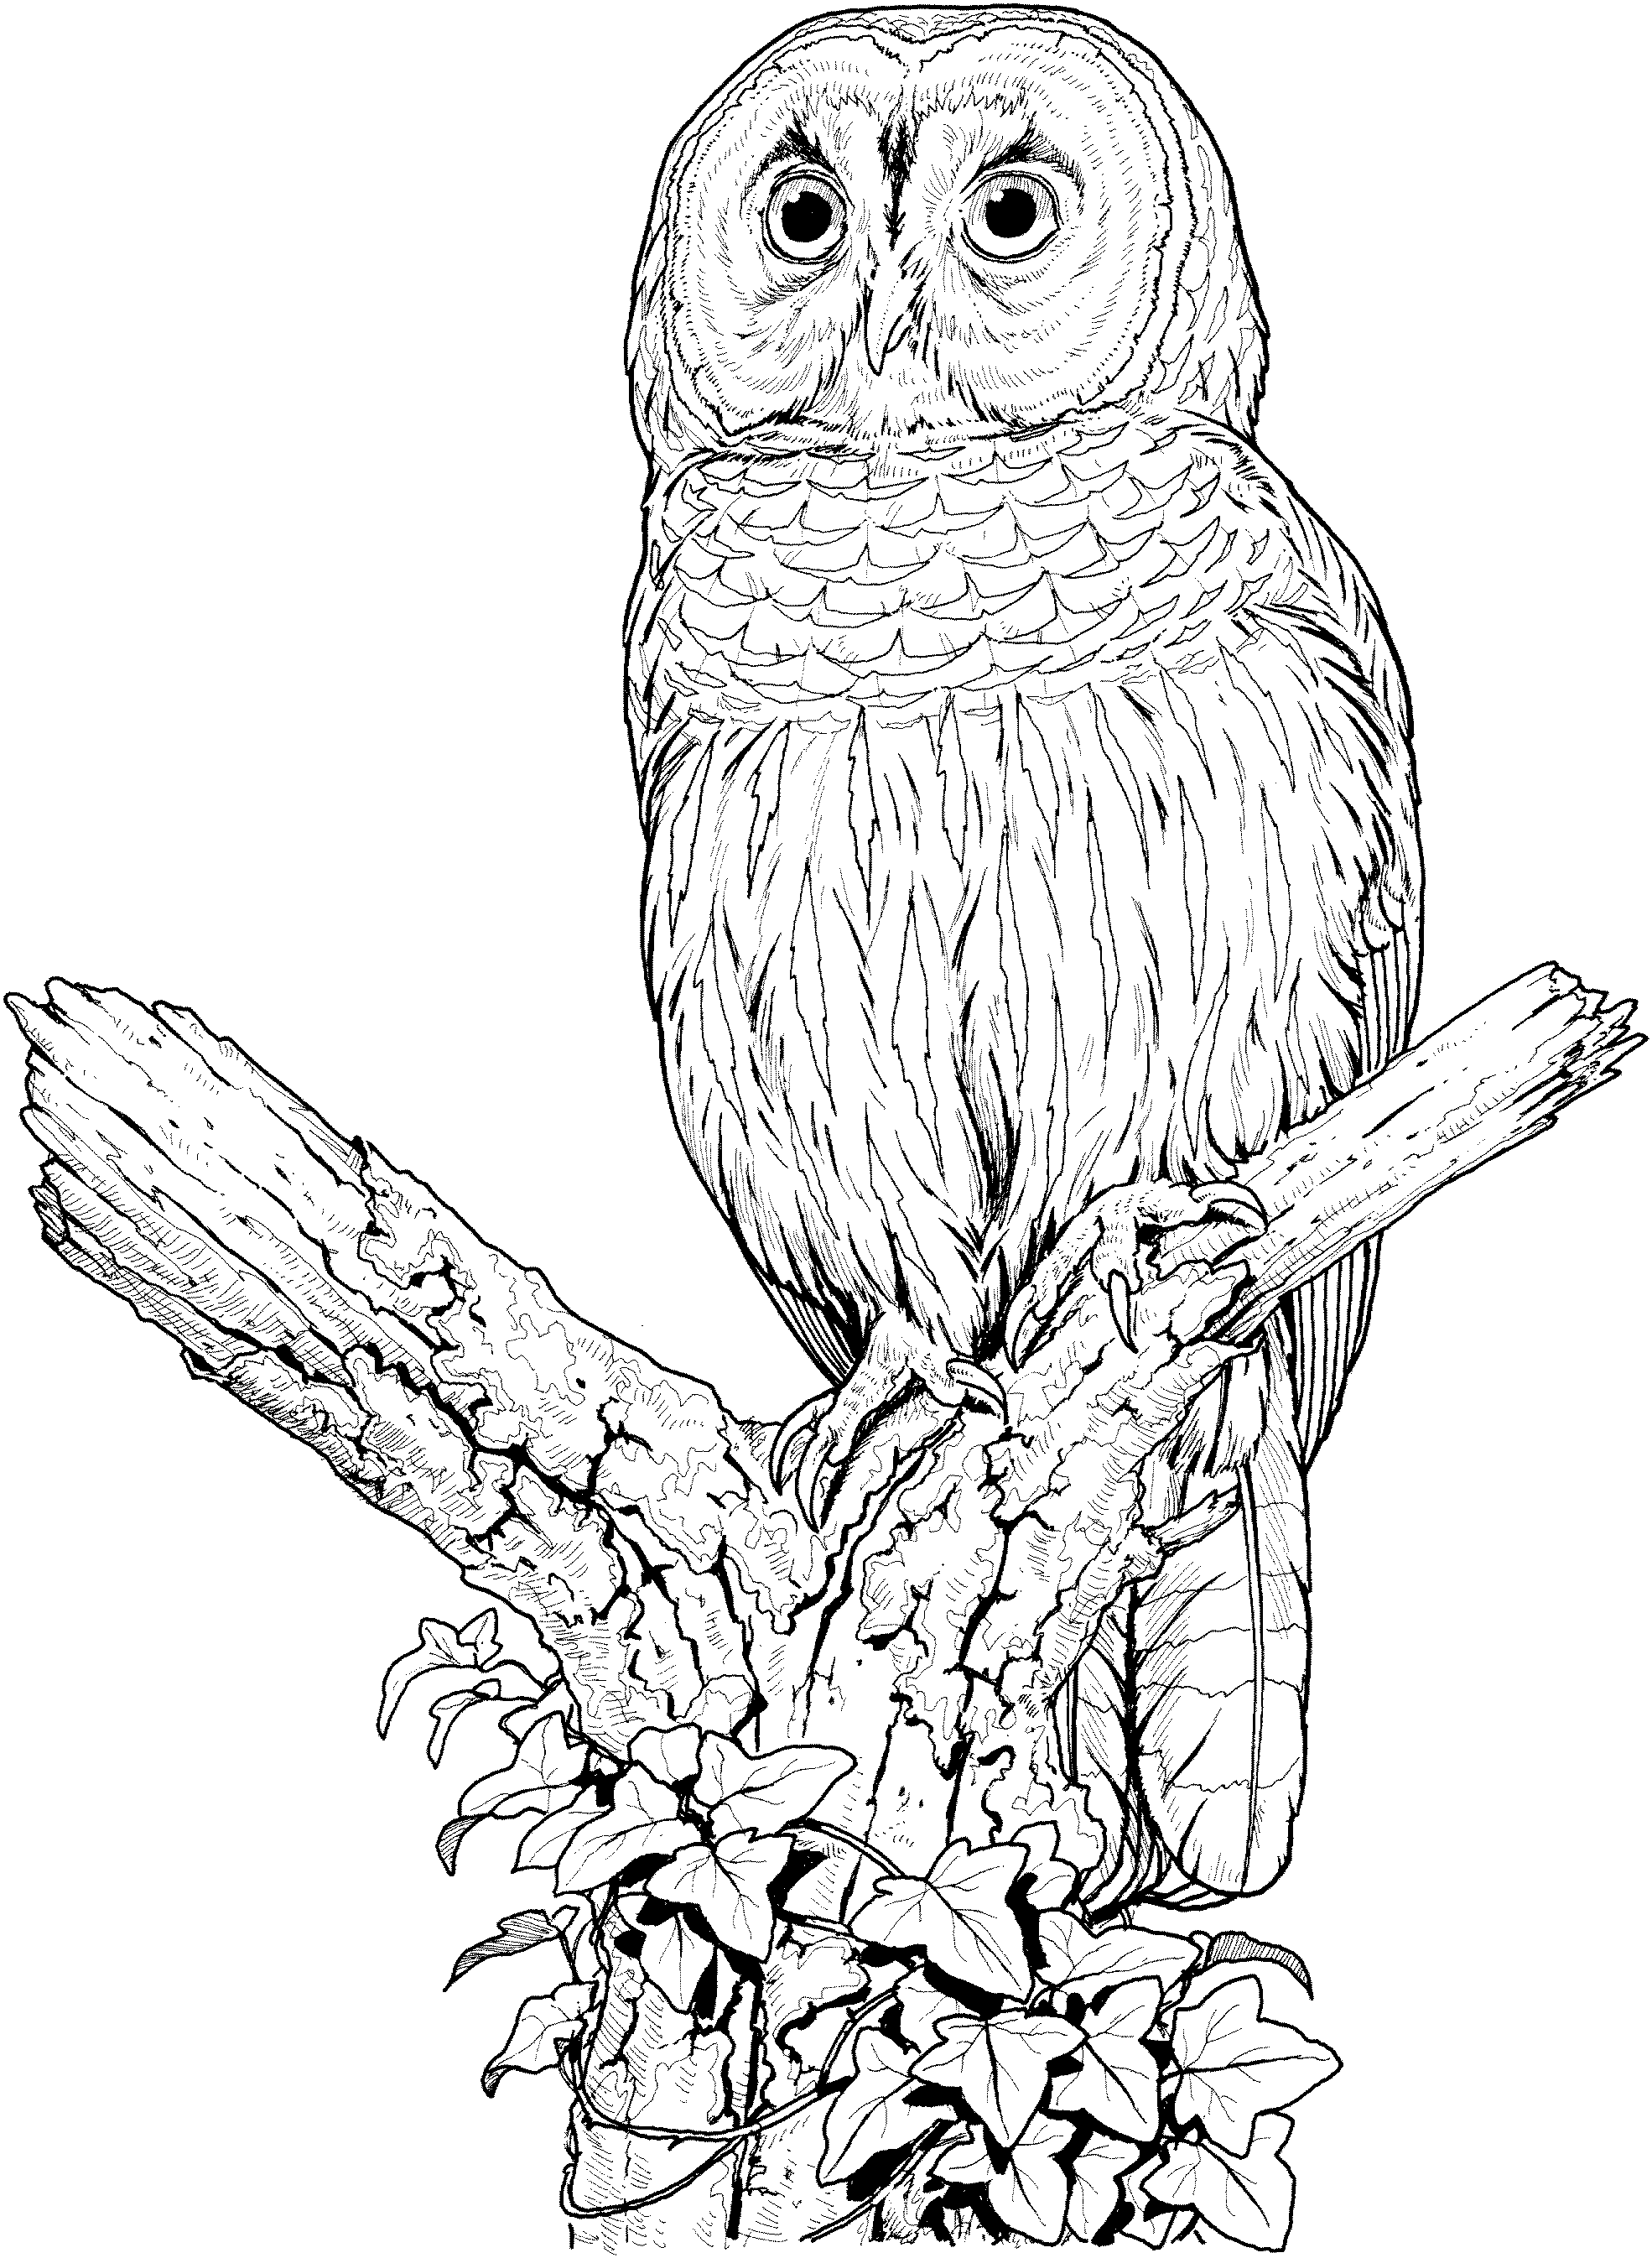 owl coloring page free printable owl coloring pages for kids cool2bkids owl coloring page 